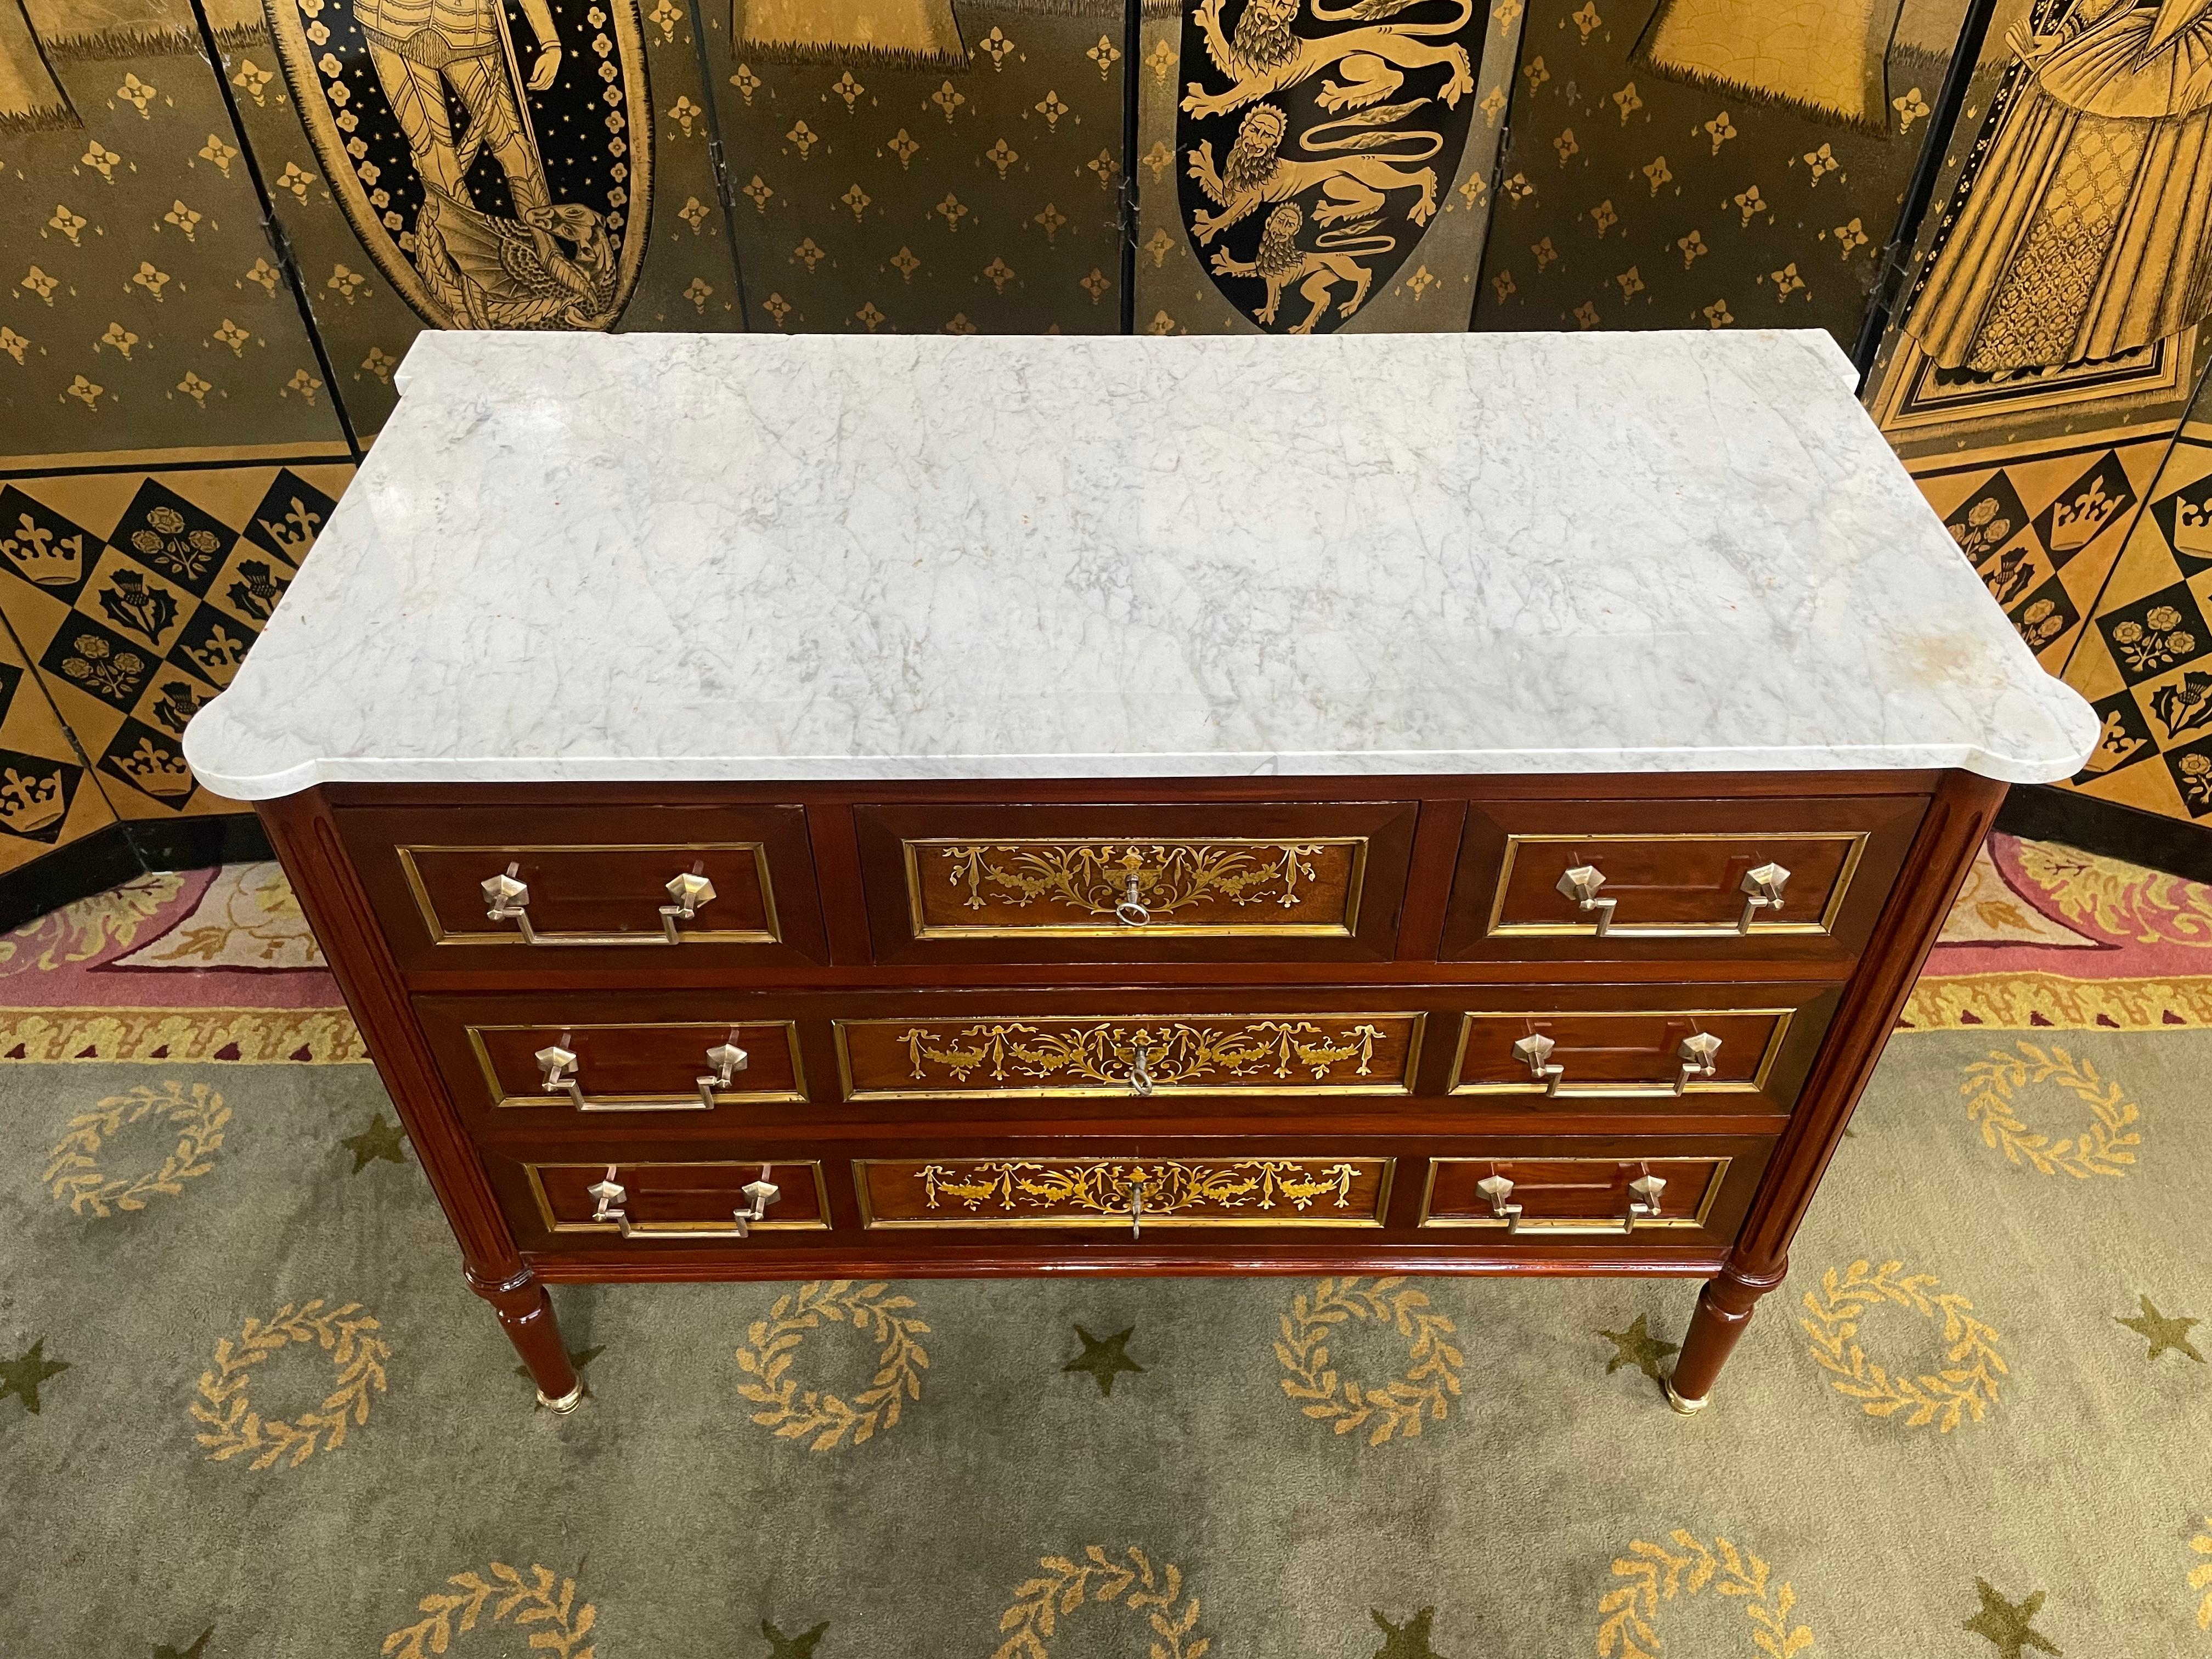 Louis XVI style chest of drawers in mahogany veneer with mahogany and amaranth.

Brass ornament and carrare marble tray.

Fully restored by Pascal Sedillot cabinet maker of Art with buffer varnish.